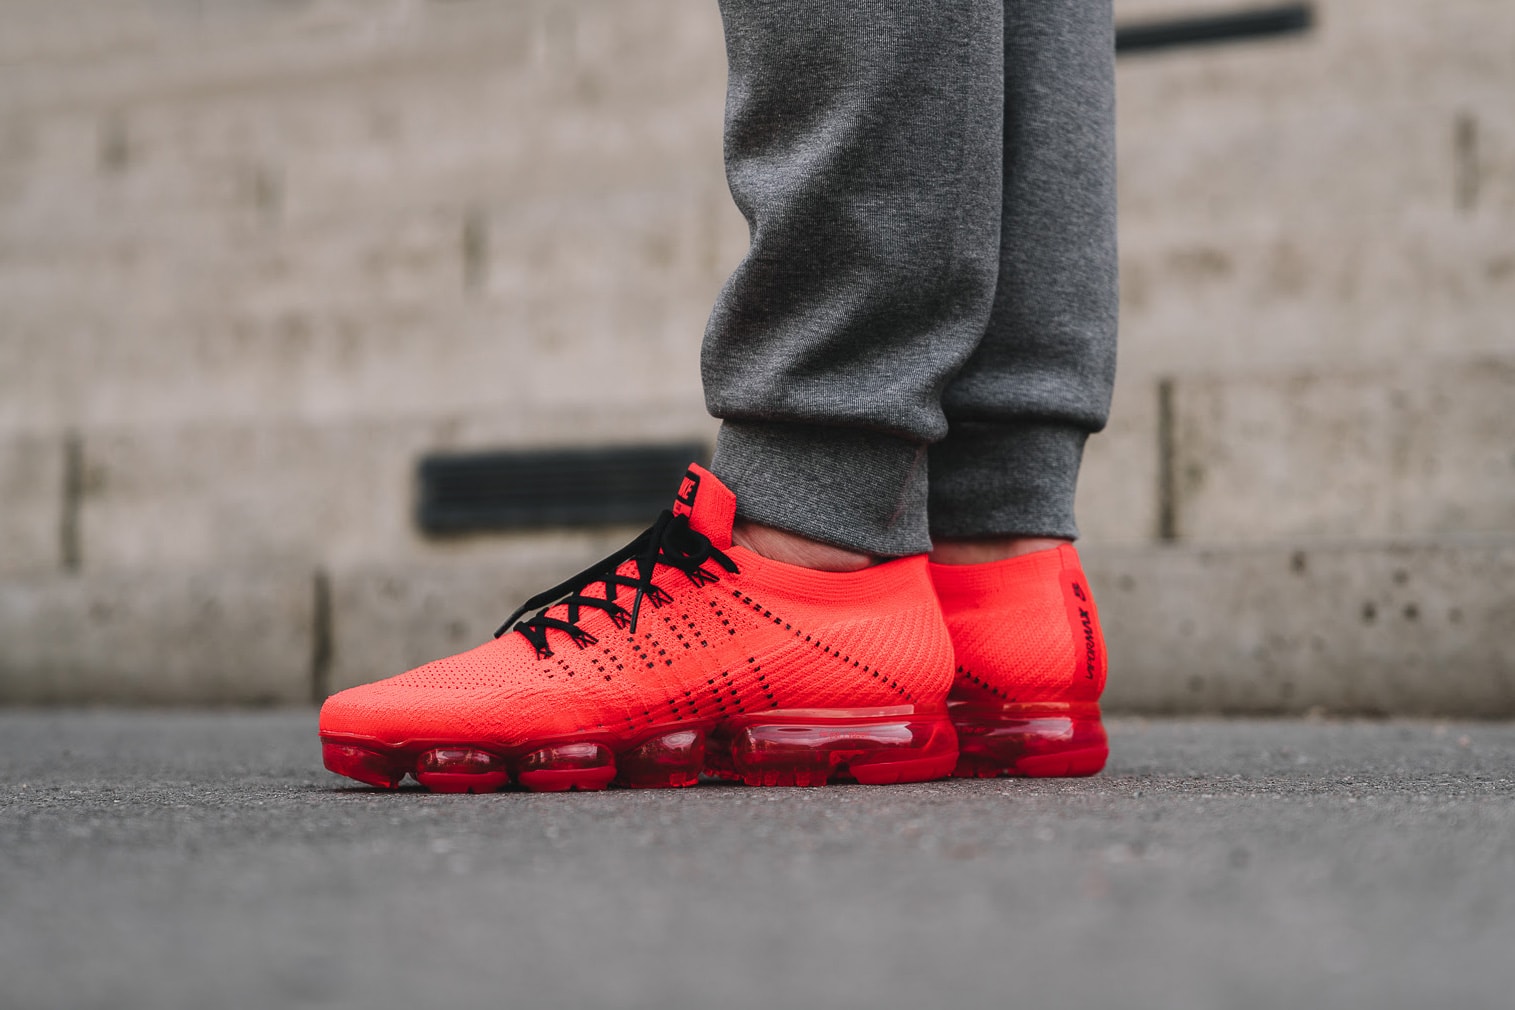 CLOT Nike Air VaporMax Flyknit On Feet Red Edison Chen Limited Edition